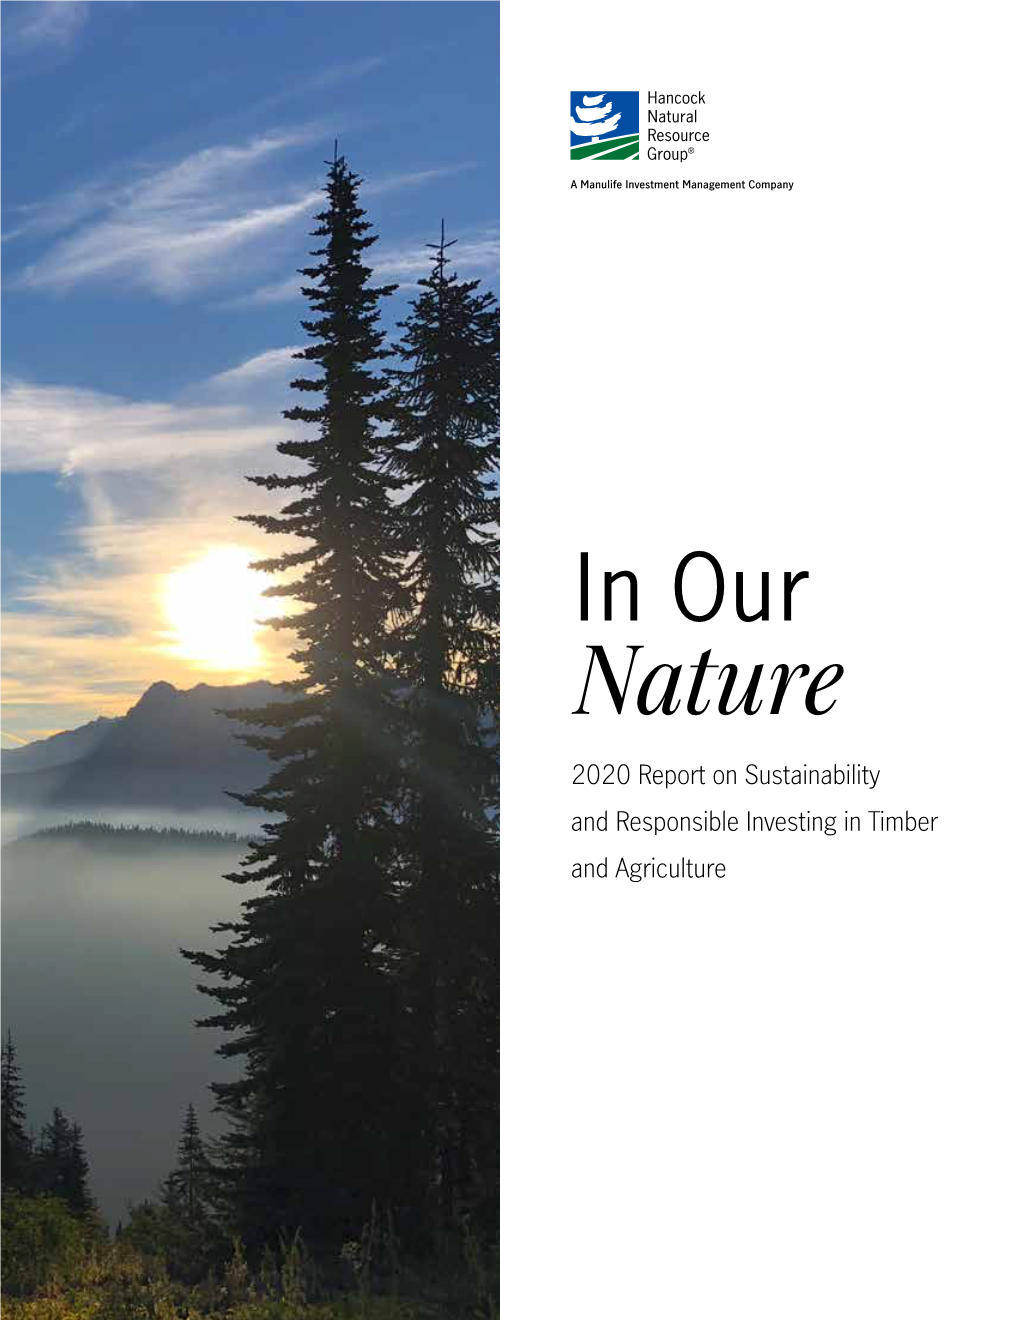 In Our Nature, 2020 Report on Sustainability and Responsible